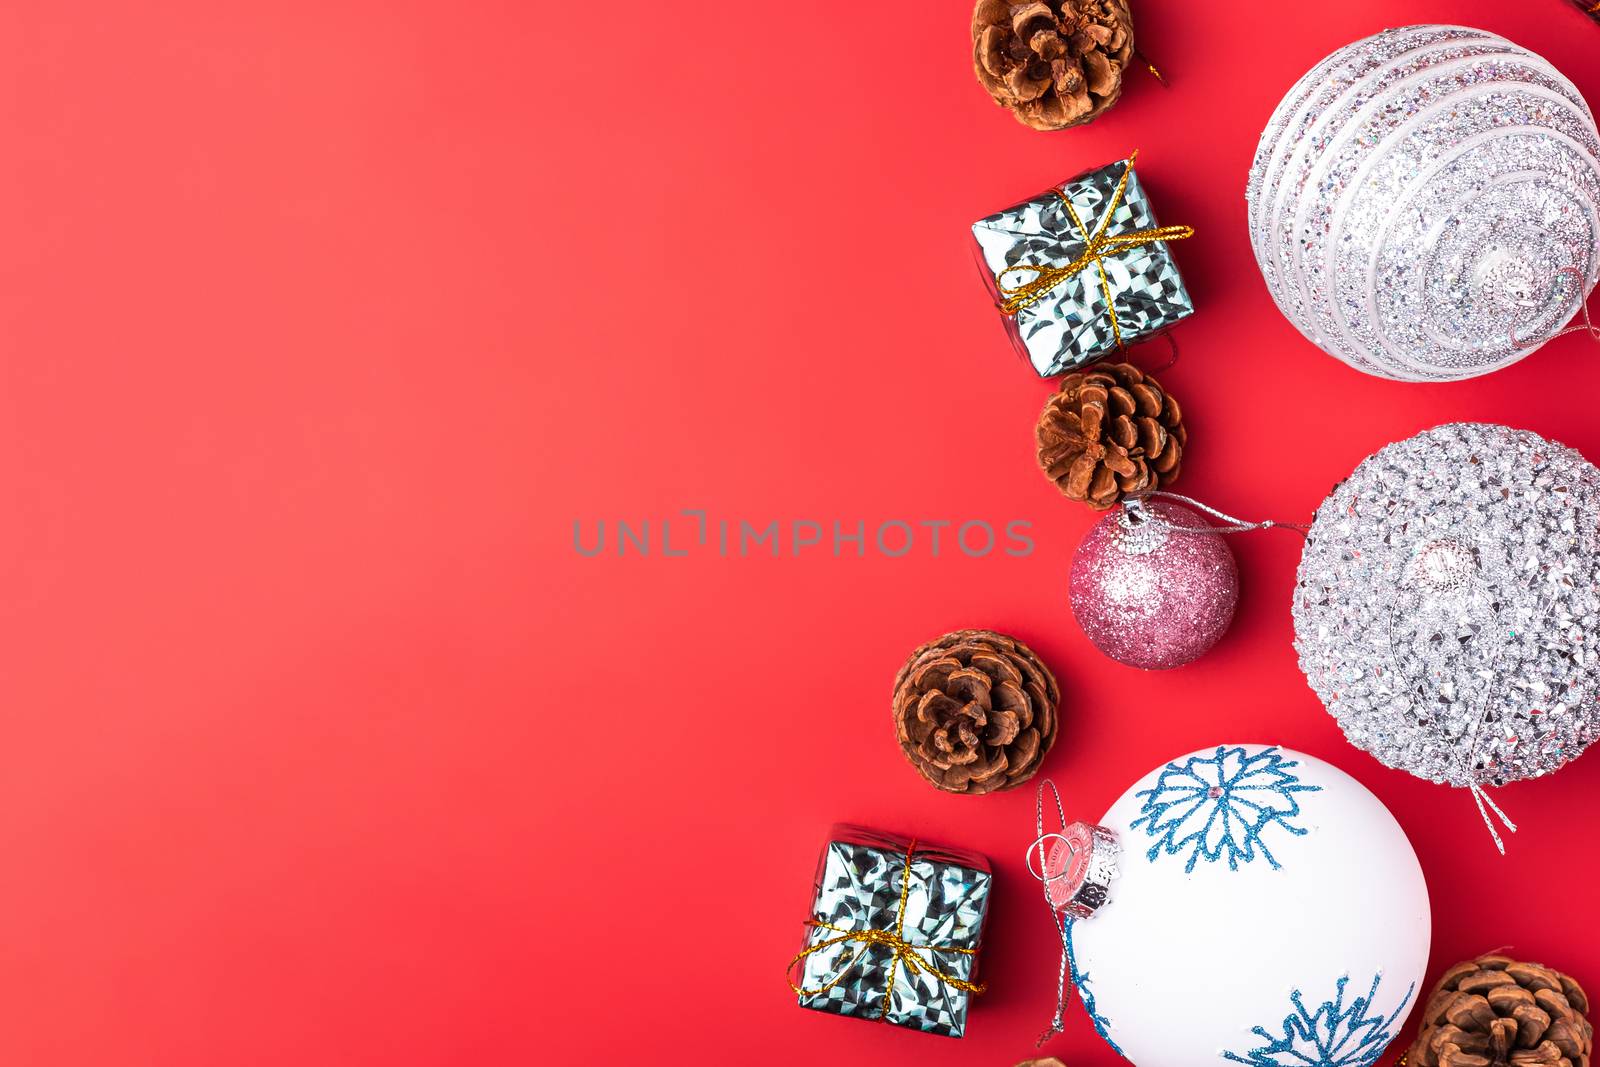 Christmas New Year composition. Gifts, fir tree cones, silver ball decorations on red background. Winter holidays concept. Flat lay, top view, copy space